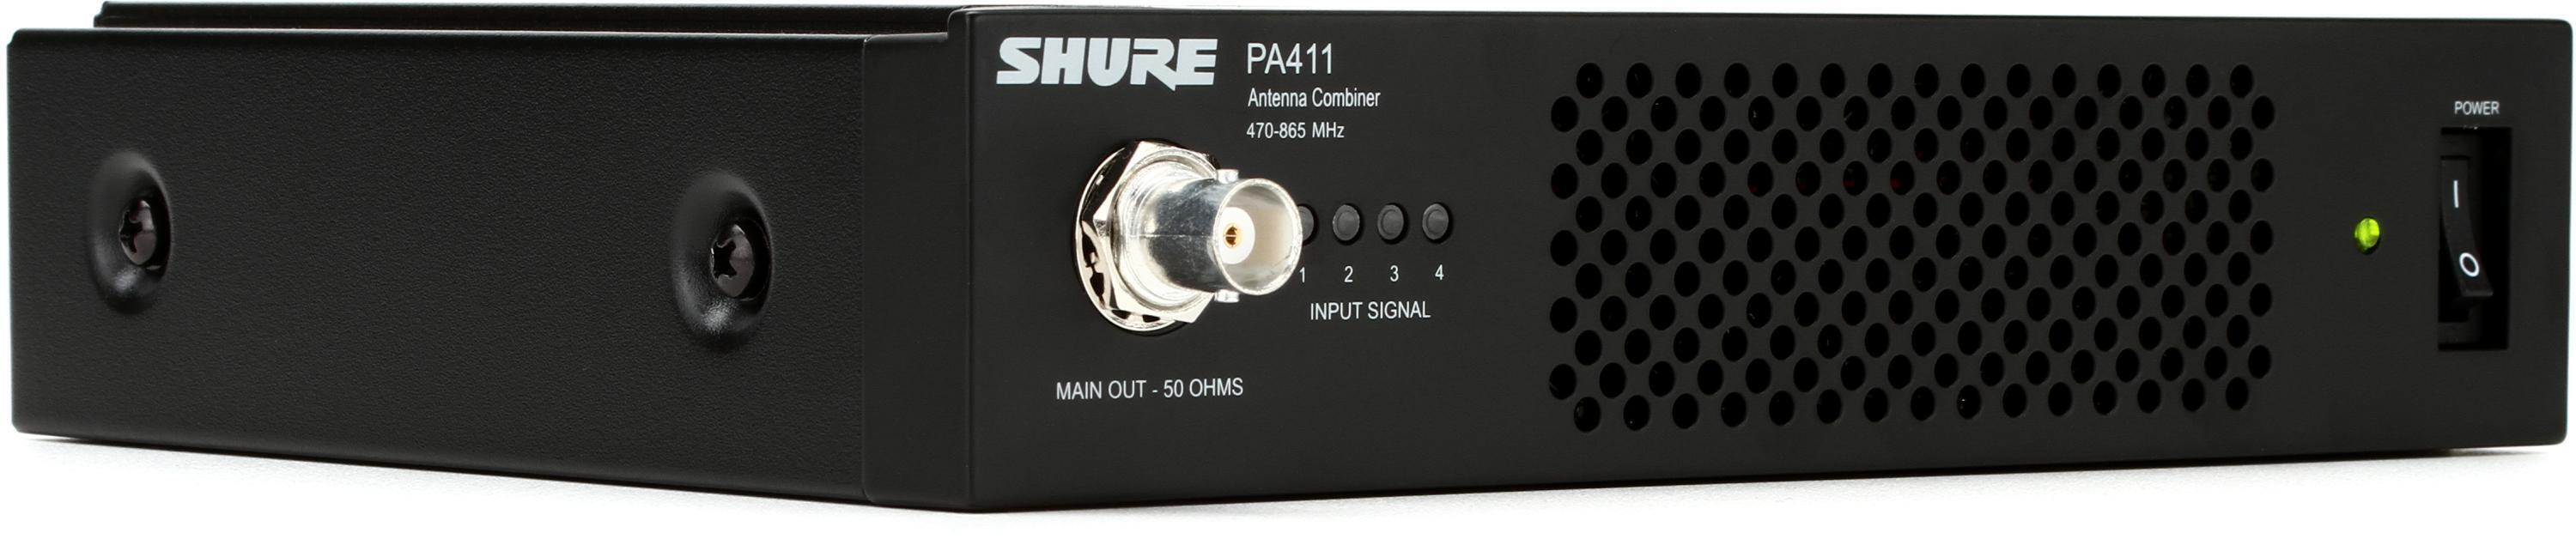 Bundled Item: Shure PA411 Antenna Combiner for PSM 300 Series Wireless